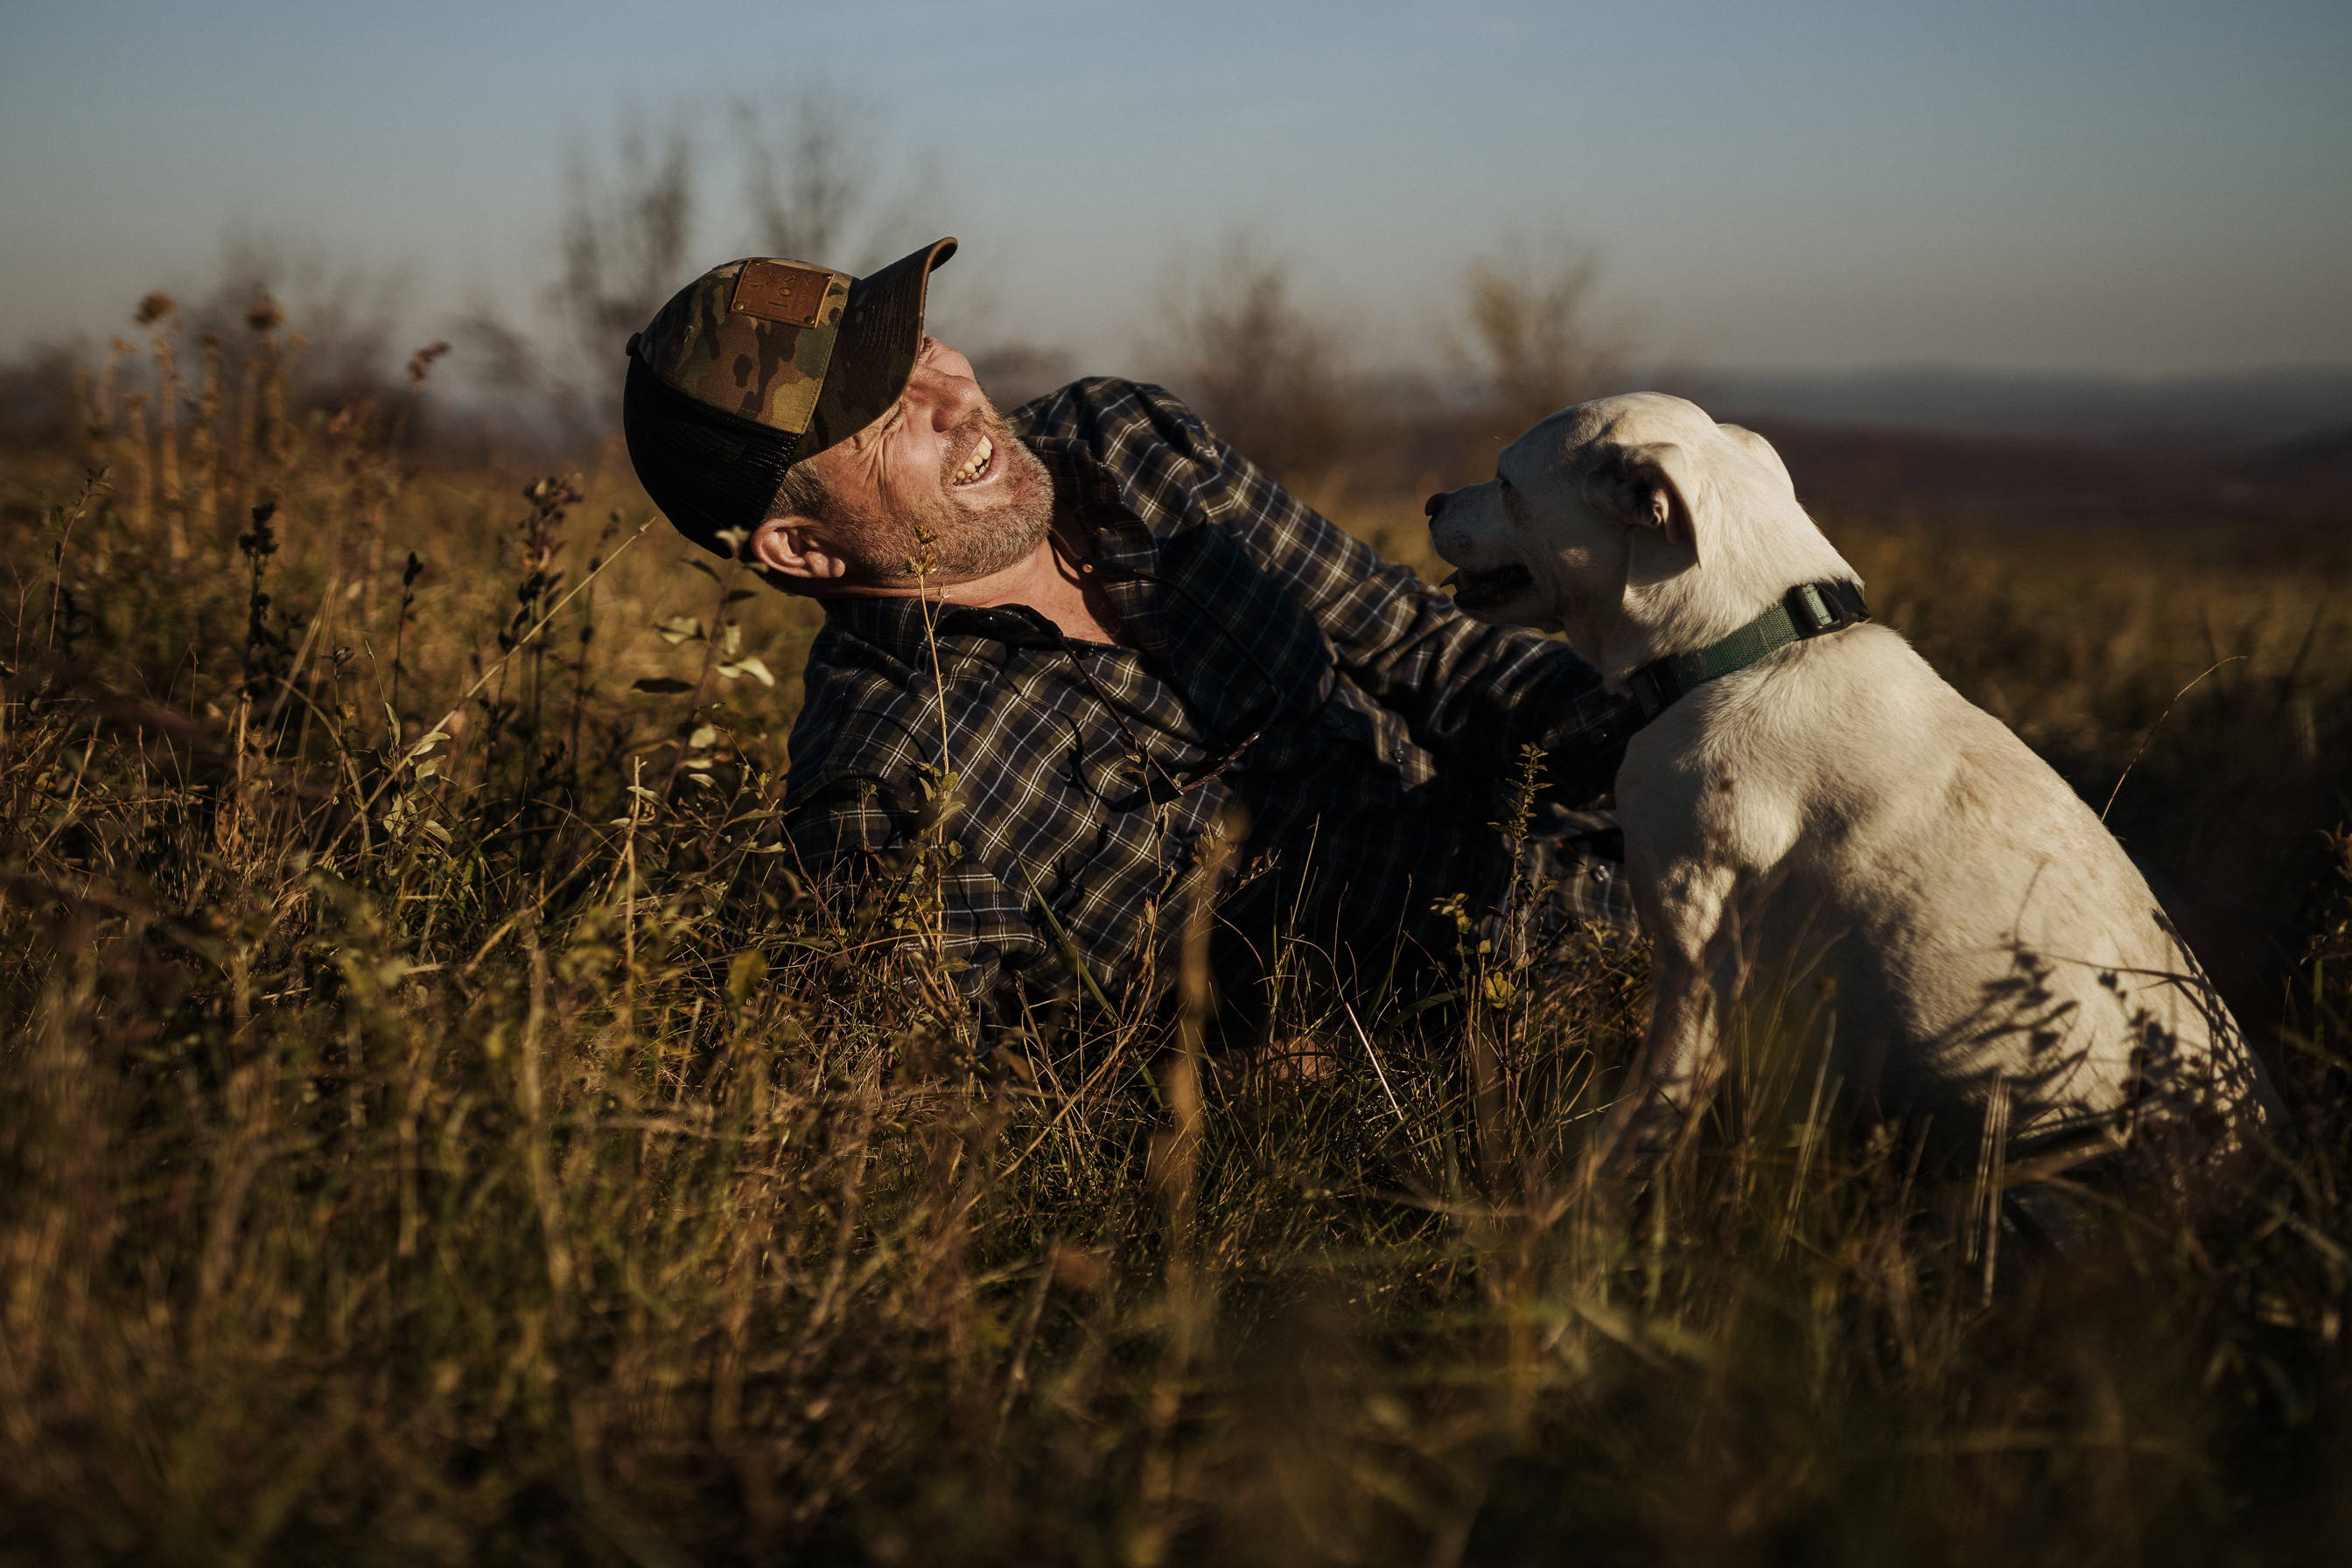 A man laying in a grassy field wearing the Forest Arrowood Flannel custom shirt smiling at his dog.